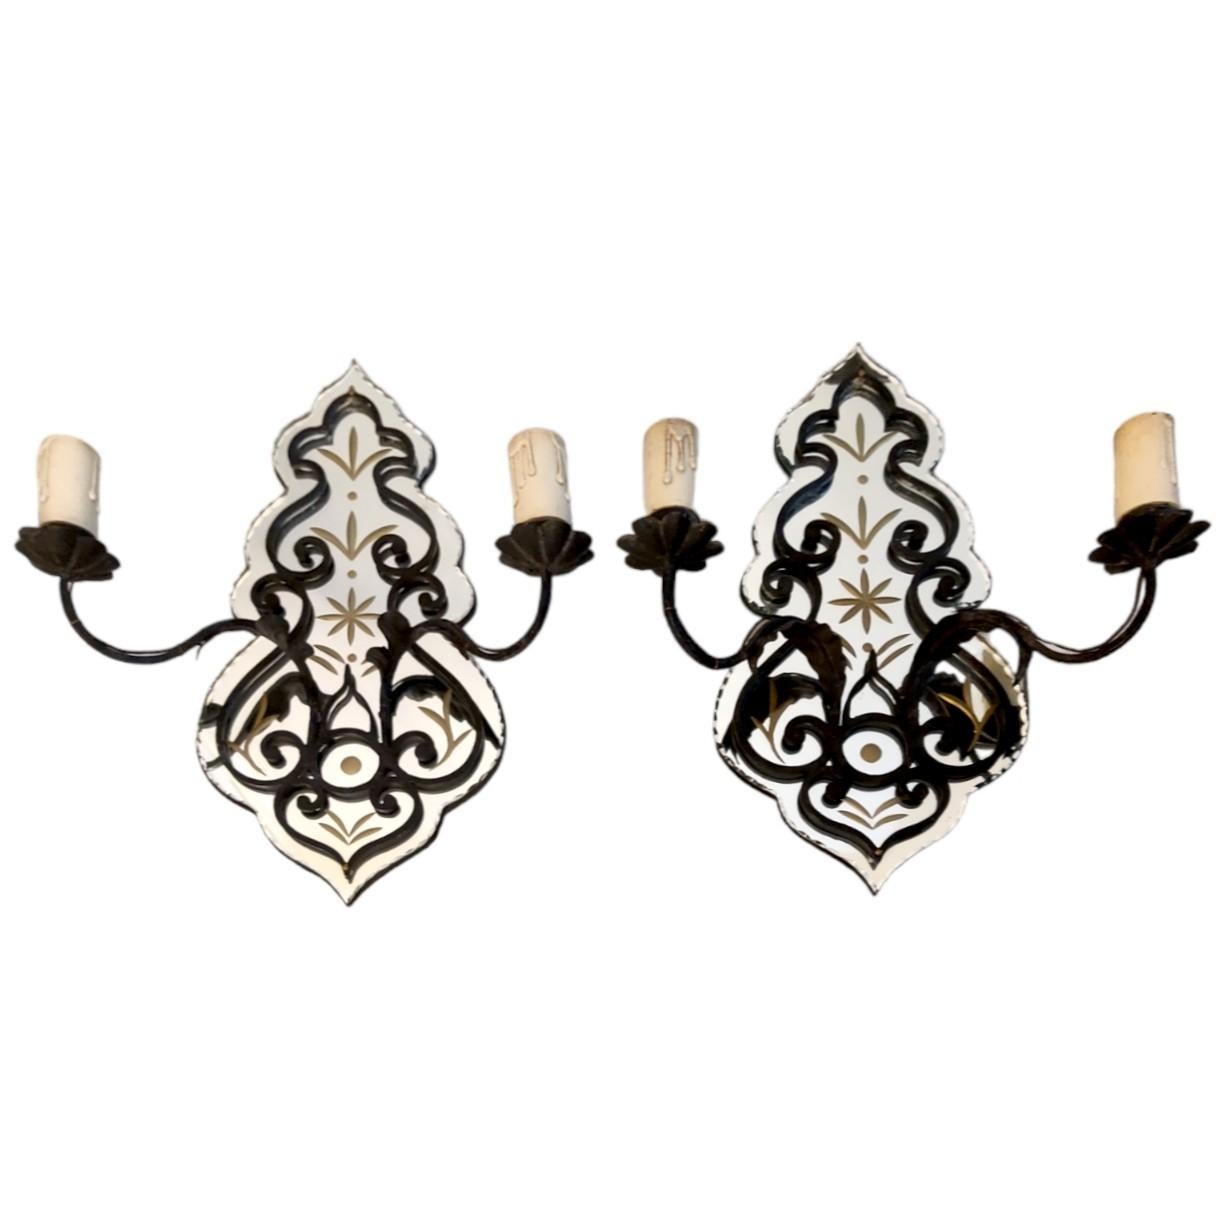 Pair of French Wrought Iron Sconces with Mirrored Backs For Sale 4